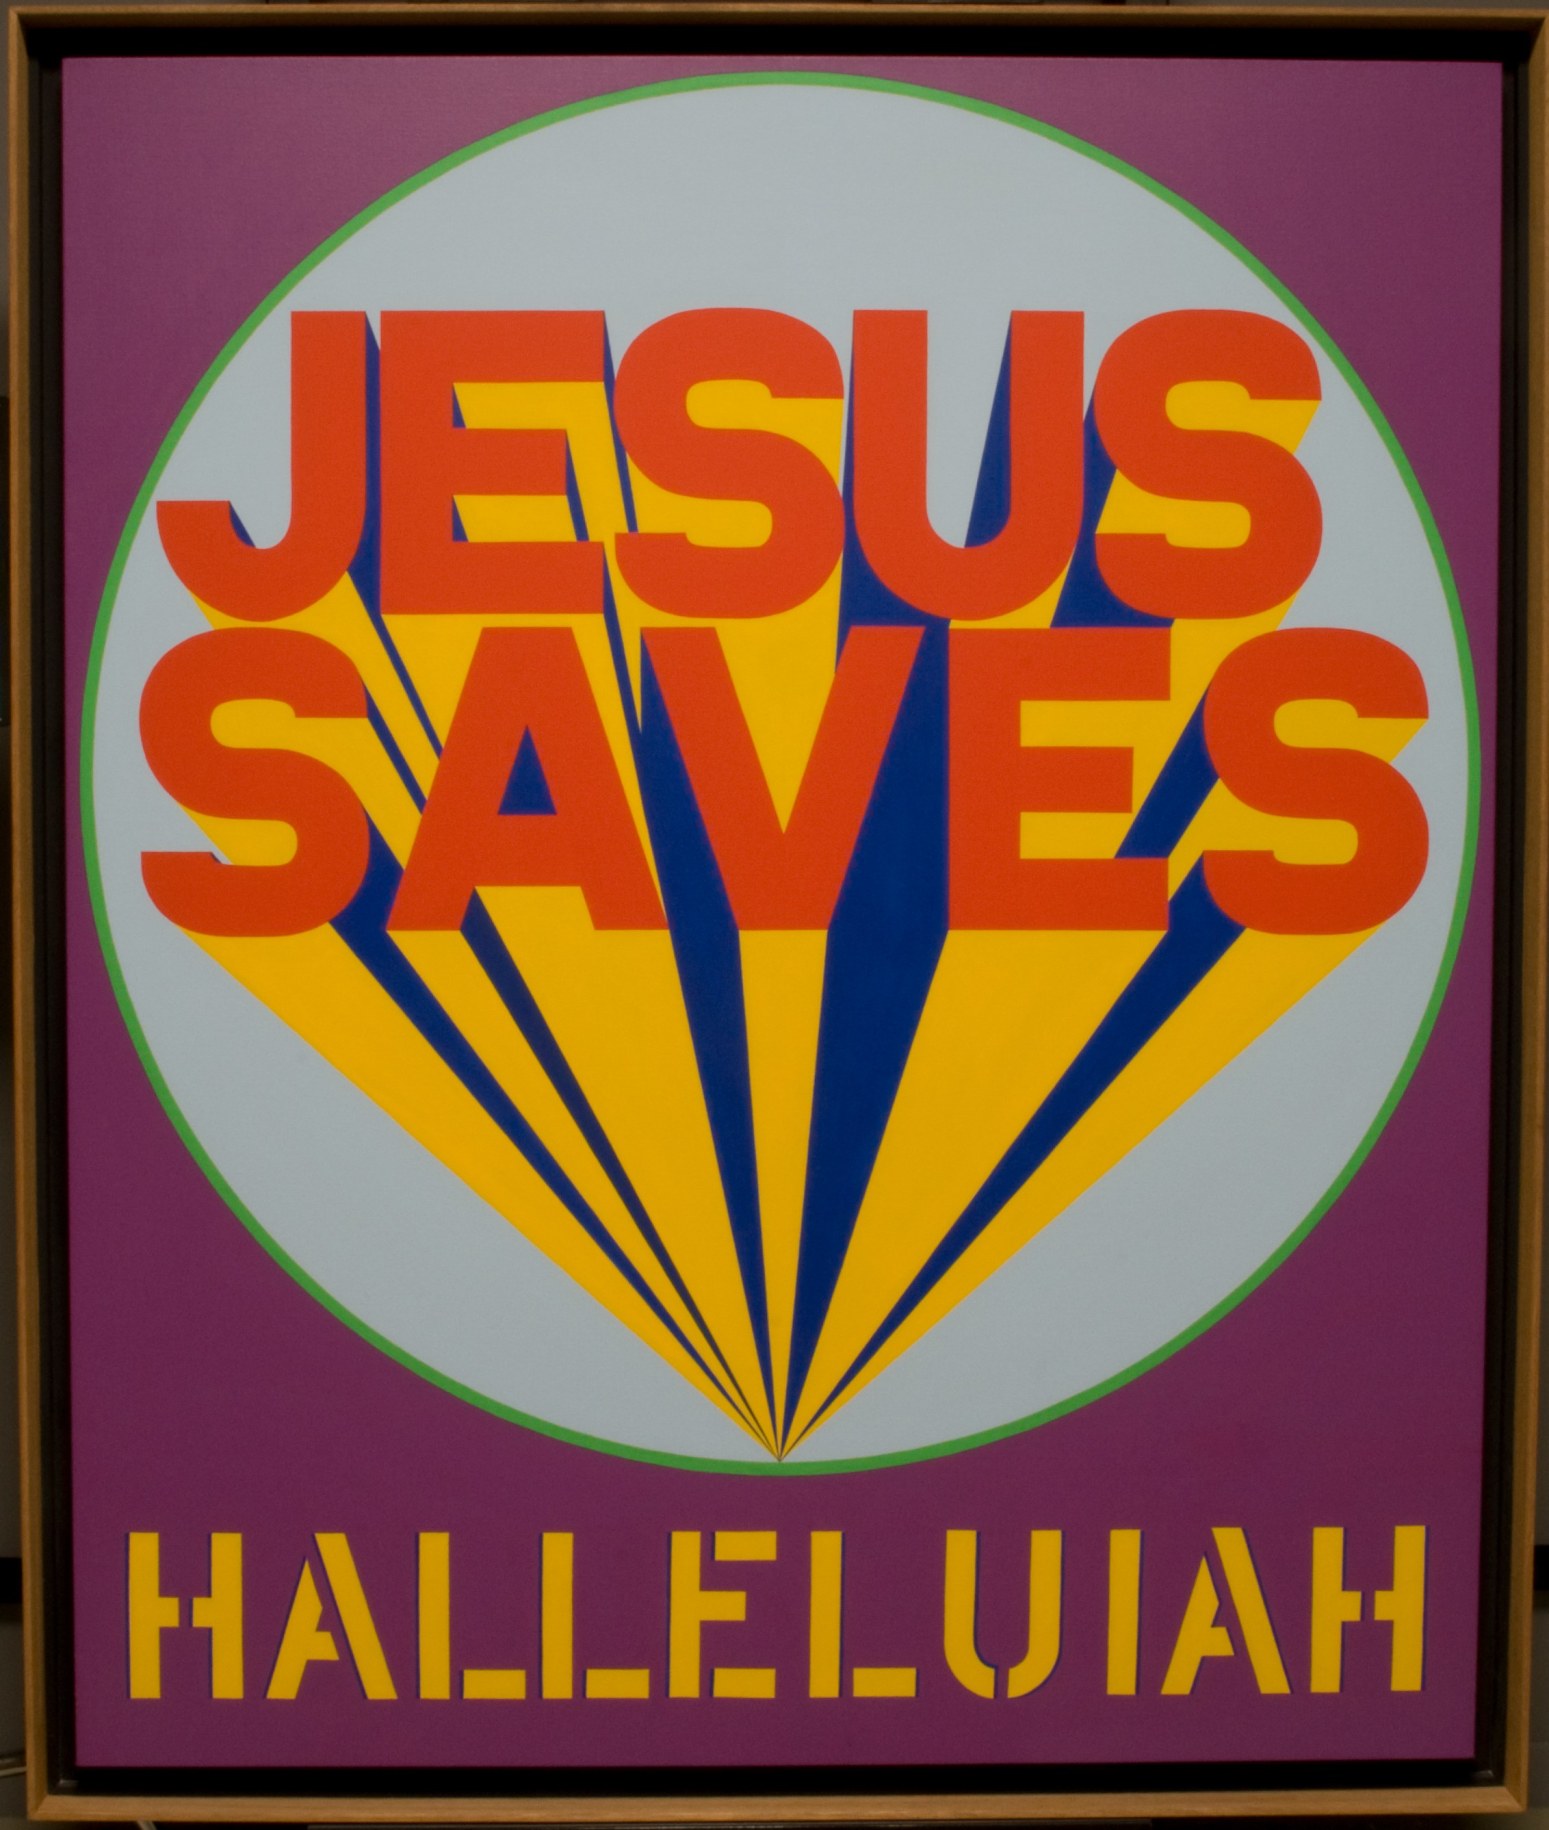 A 60 by 50 inch canvas with a purple background the the title, Halleluiah, painted in yellow stenciled letters across the bottom of the painting. Above the title is a light blue circle with a green outline. Inside the circle &quot;Jesus Saves&quot; has been painted in red-orange letters, with rays of yellow and blue emanating from behind the letters.